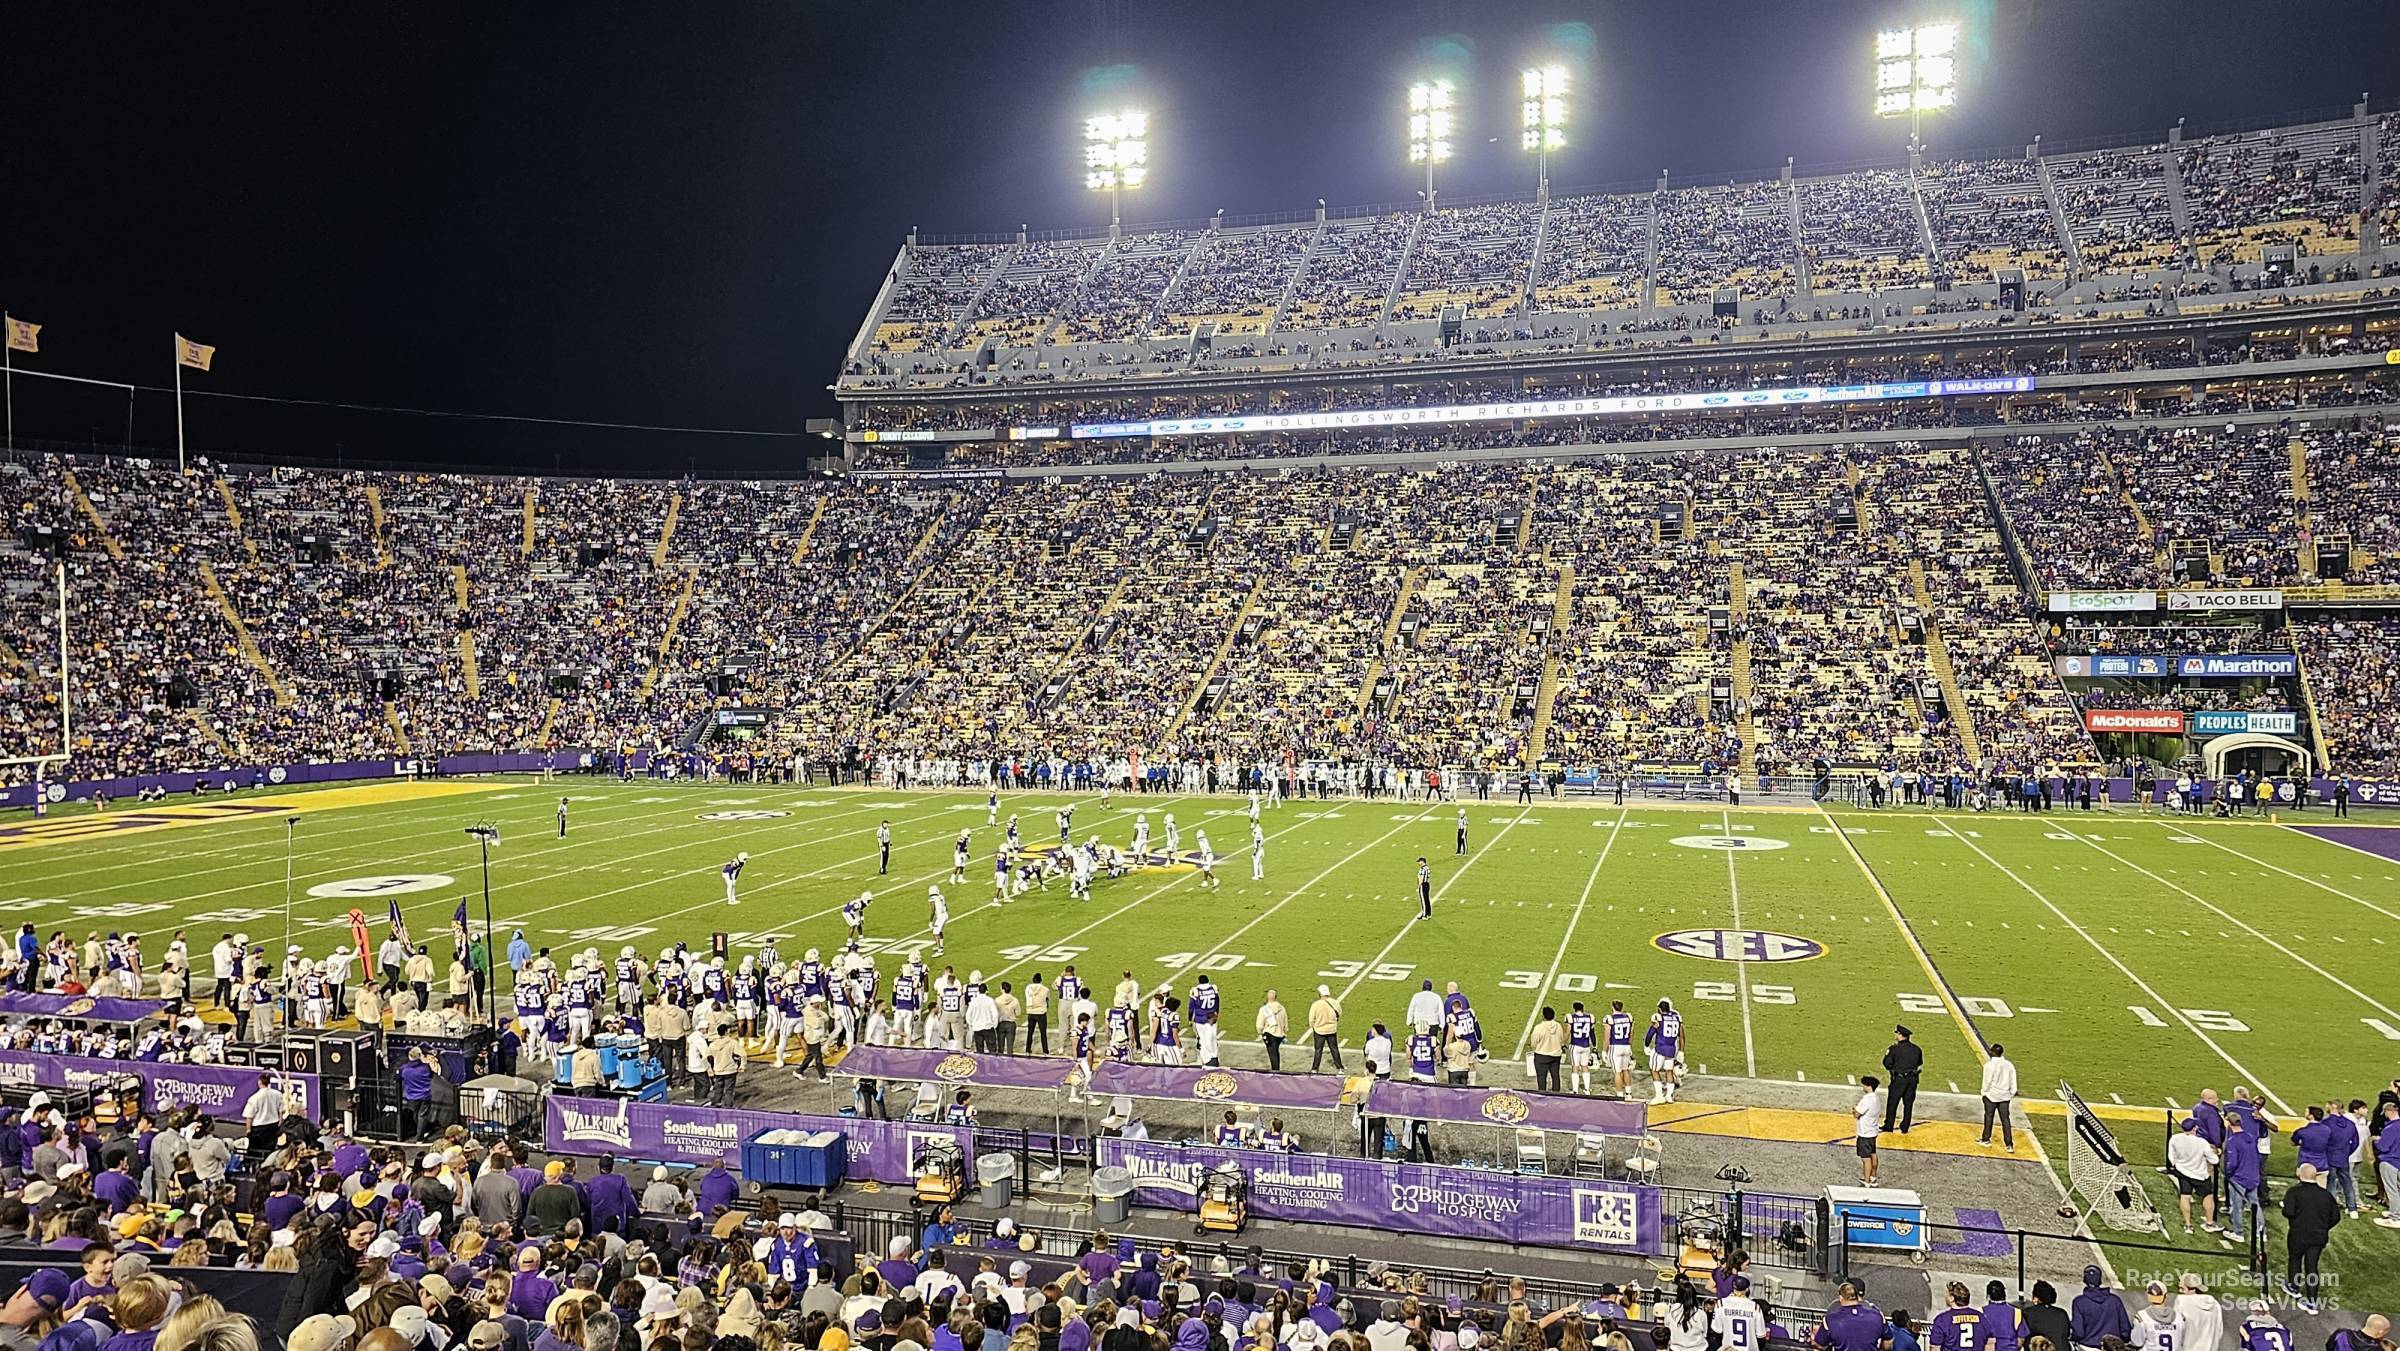 section 102, row 26 seat view  - tiger stadium